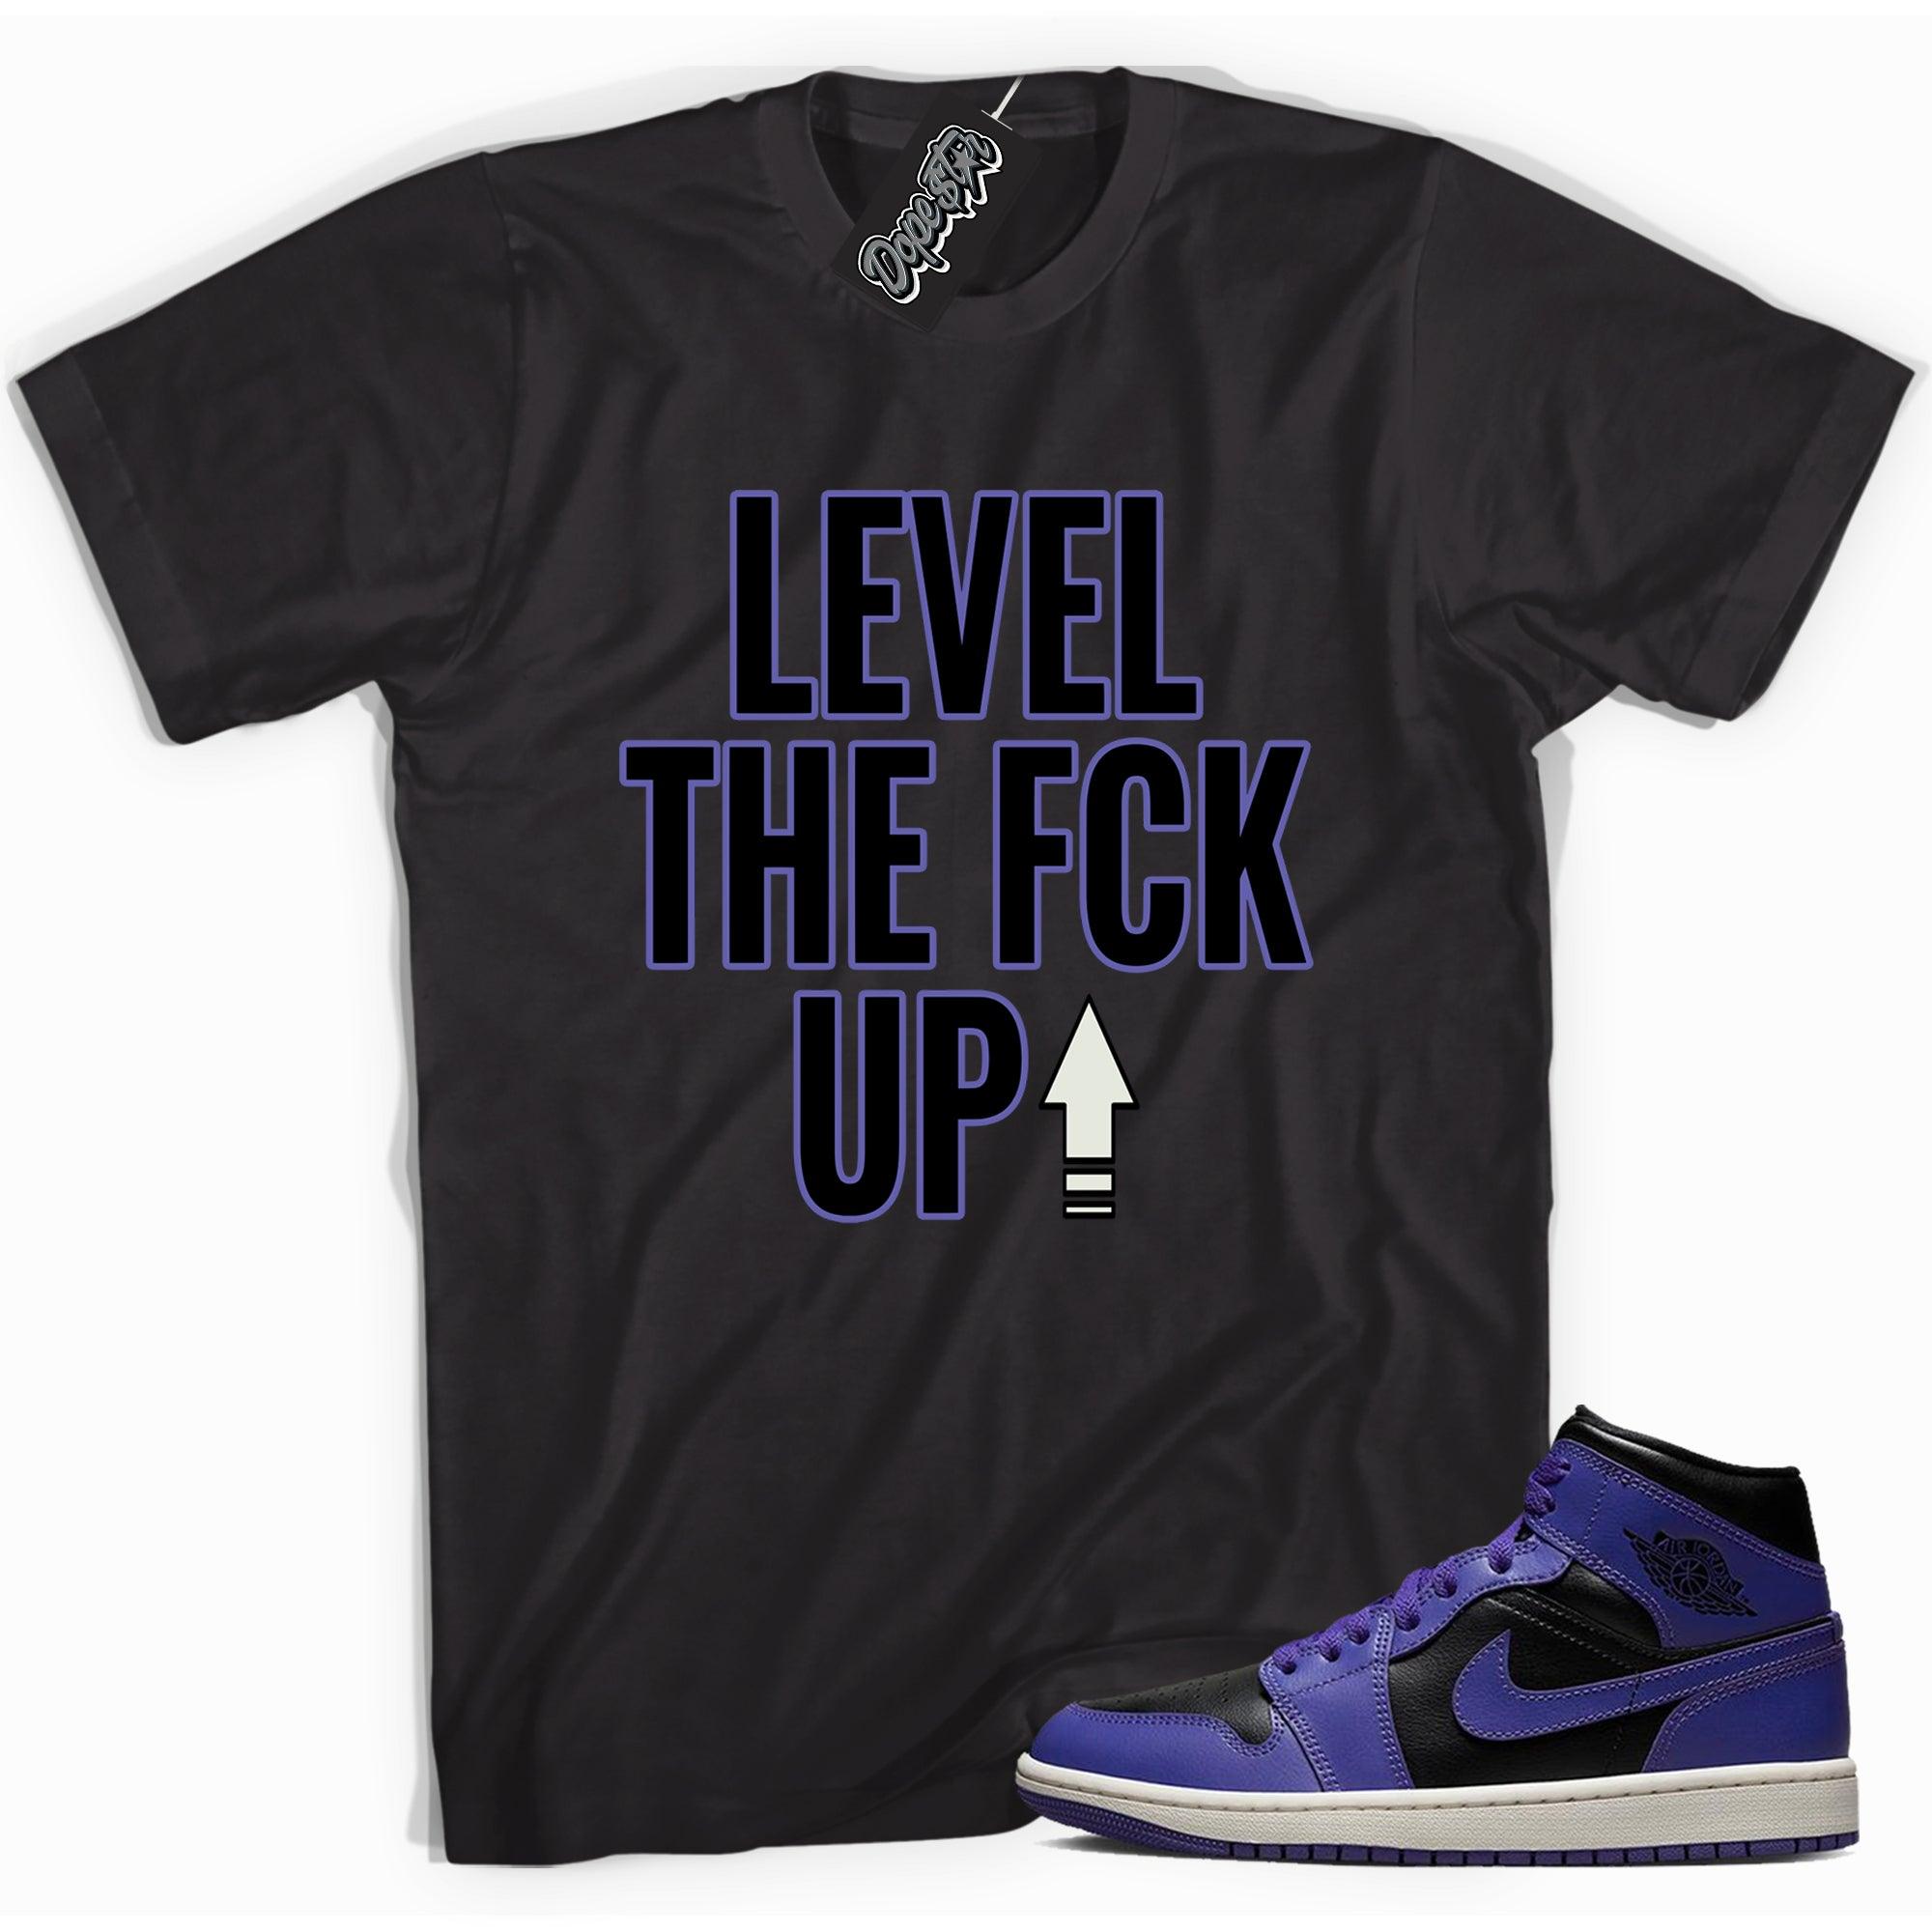 Cool black graphic tee with 'level up' print, that perfectly matches Air Jordan 1 Mid Purple Black sneakers.